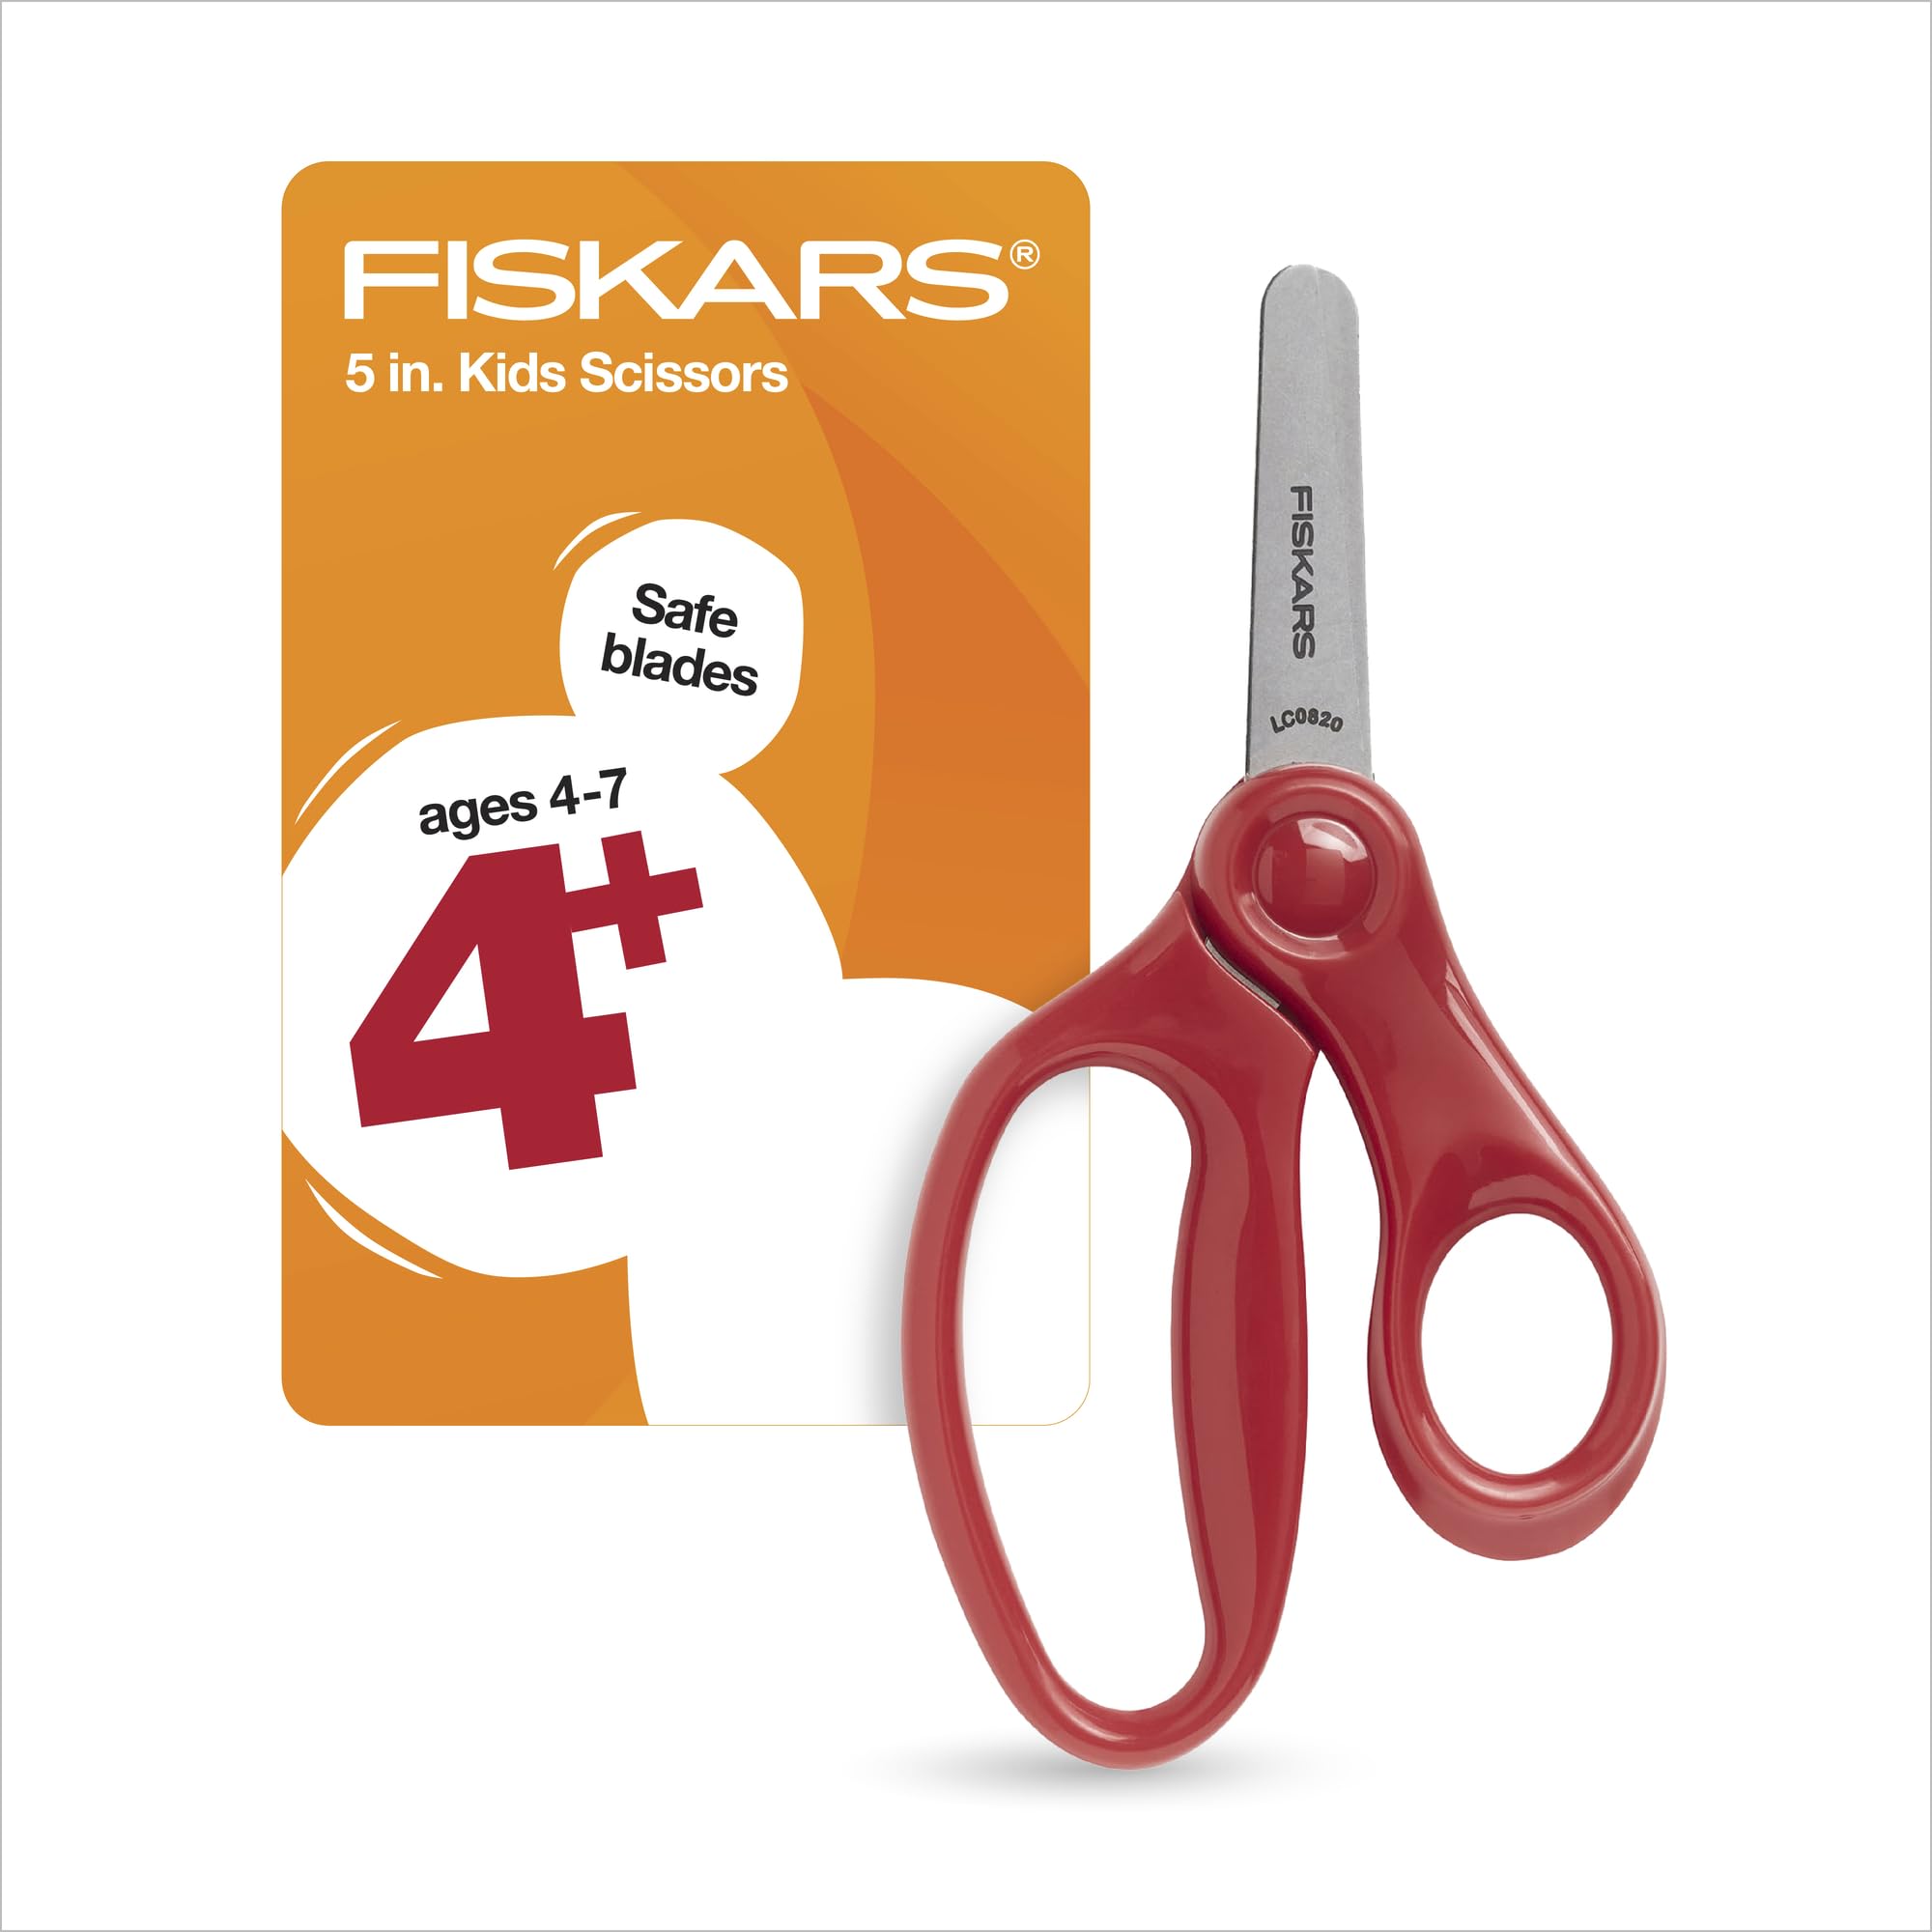 5" Fiskars Blunt-Tip Scissors for Kids (Red or Pink, 4-7 Years) $1.89 & More + Free Shipping w/ Prime or on $25+